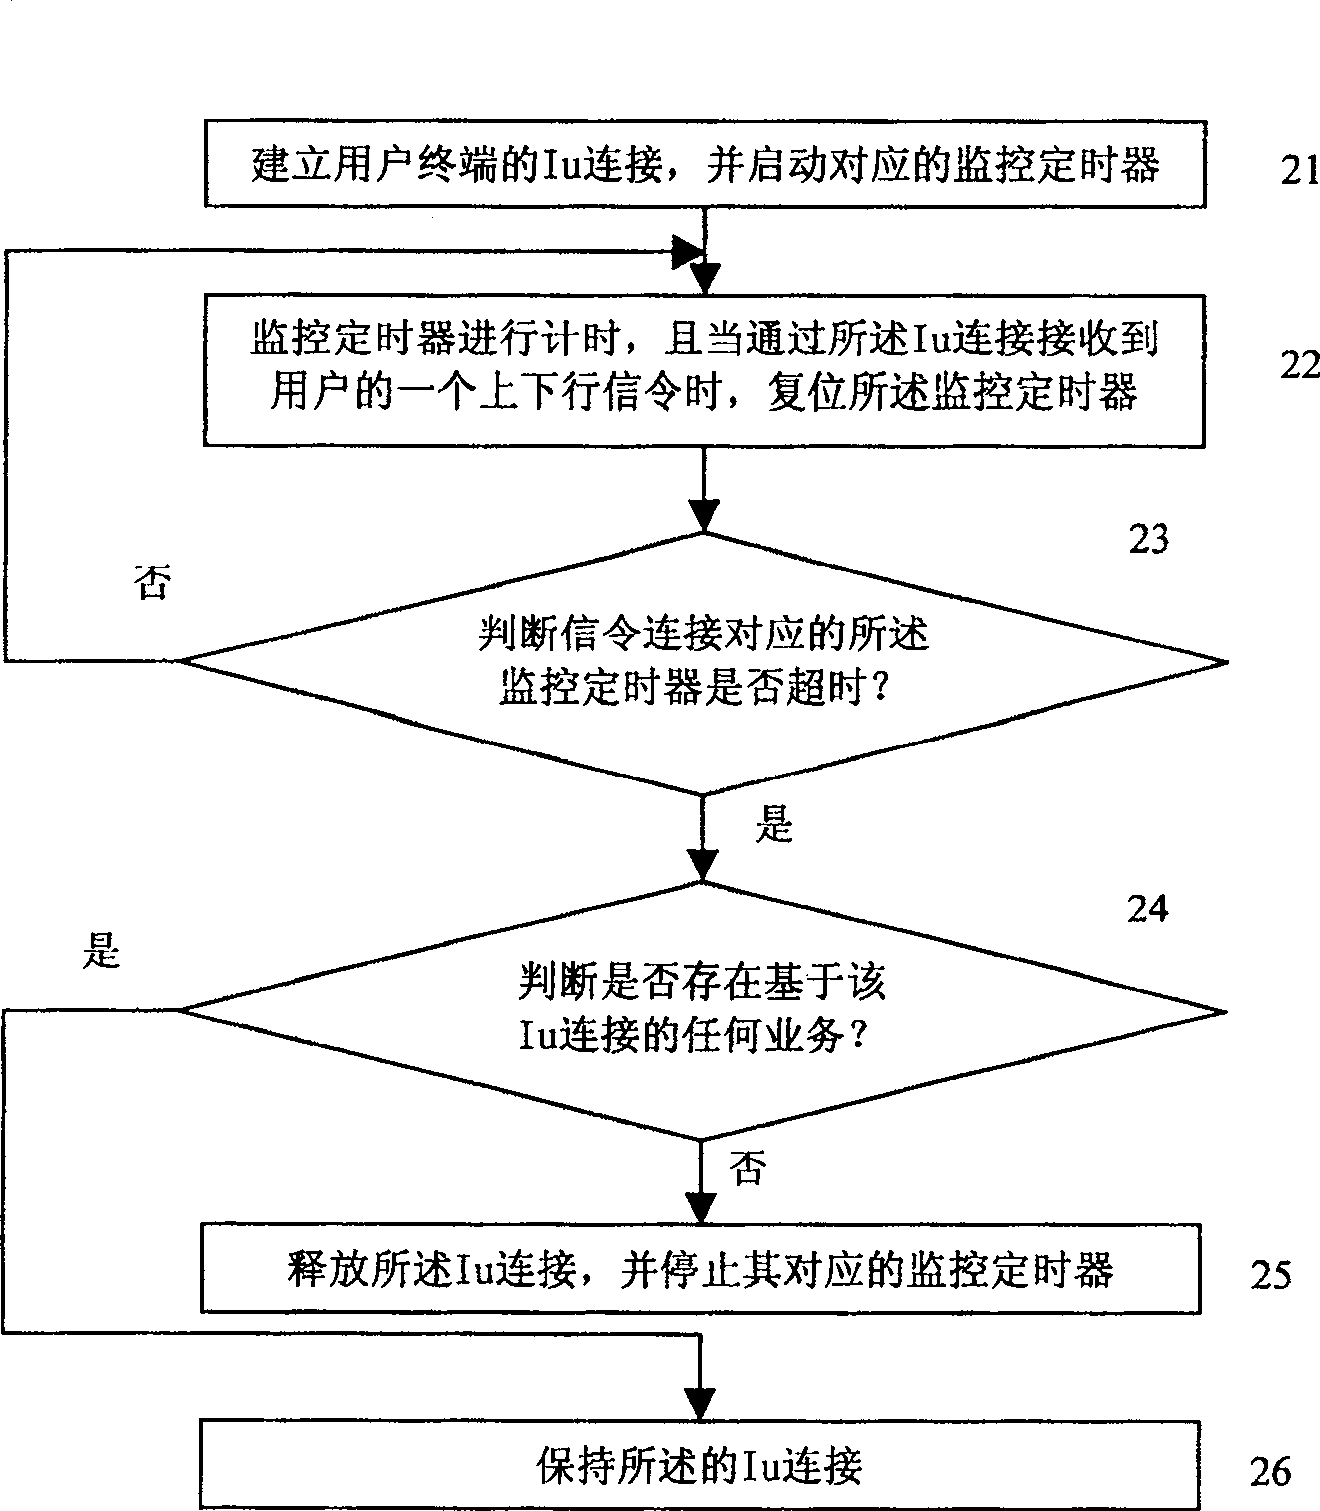 Signalling connection managing method for interface between radio network controller and core nets